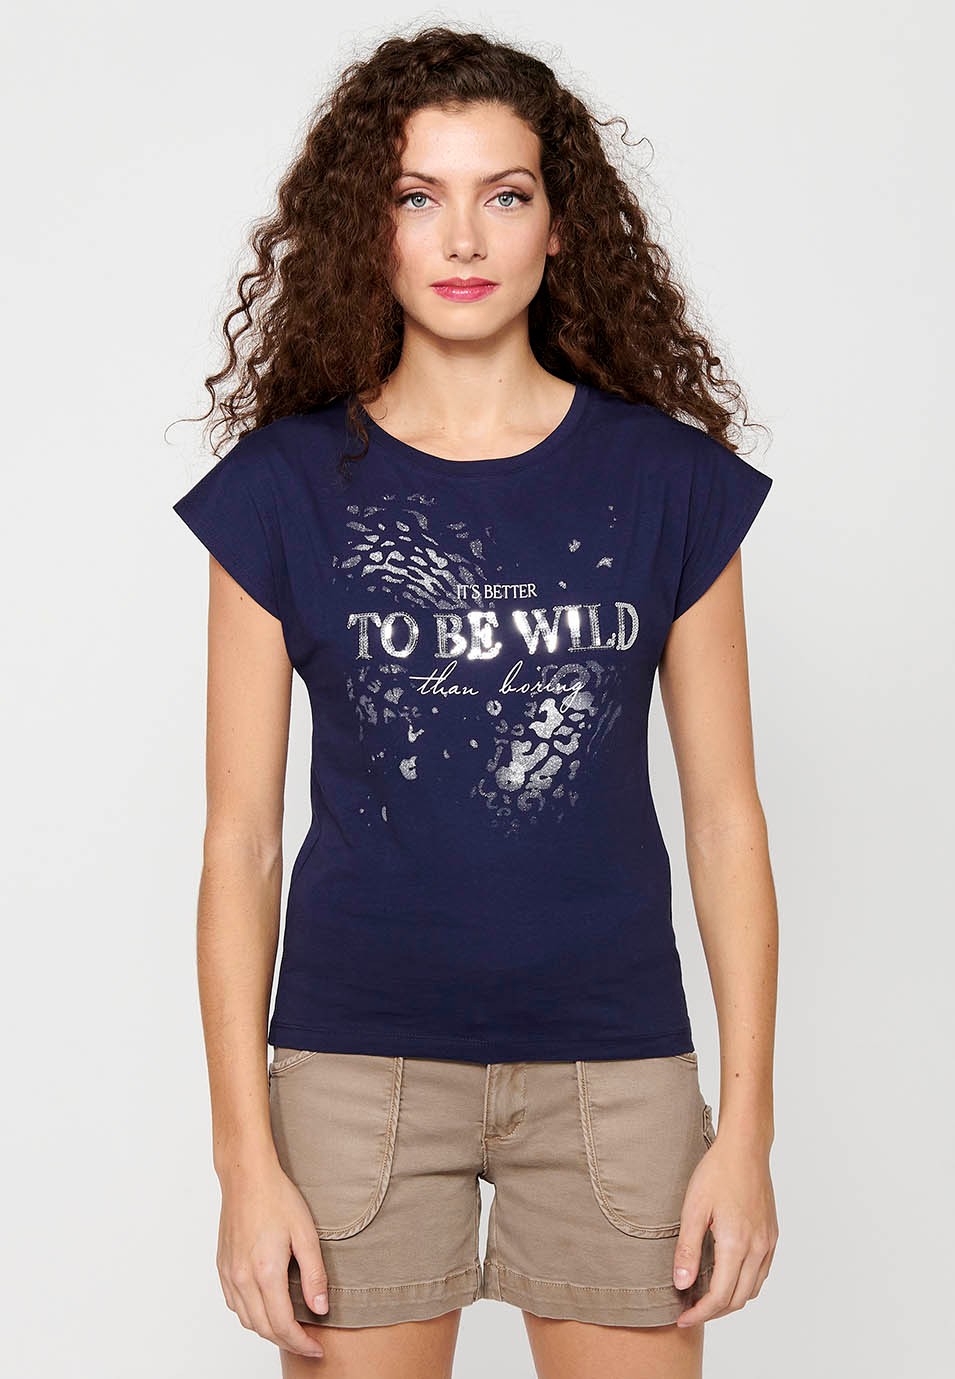 Short Sleeve T-shirt with Round Neck and Front Print in Navy Color for Women